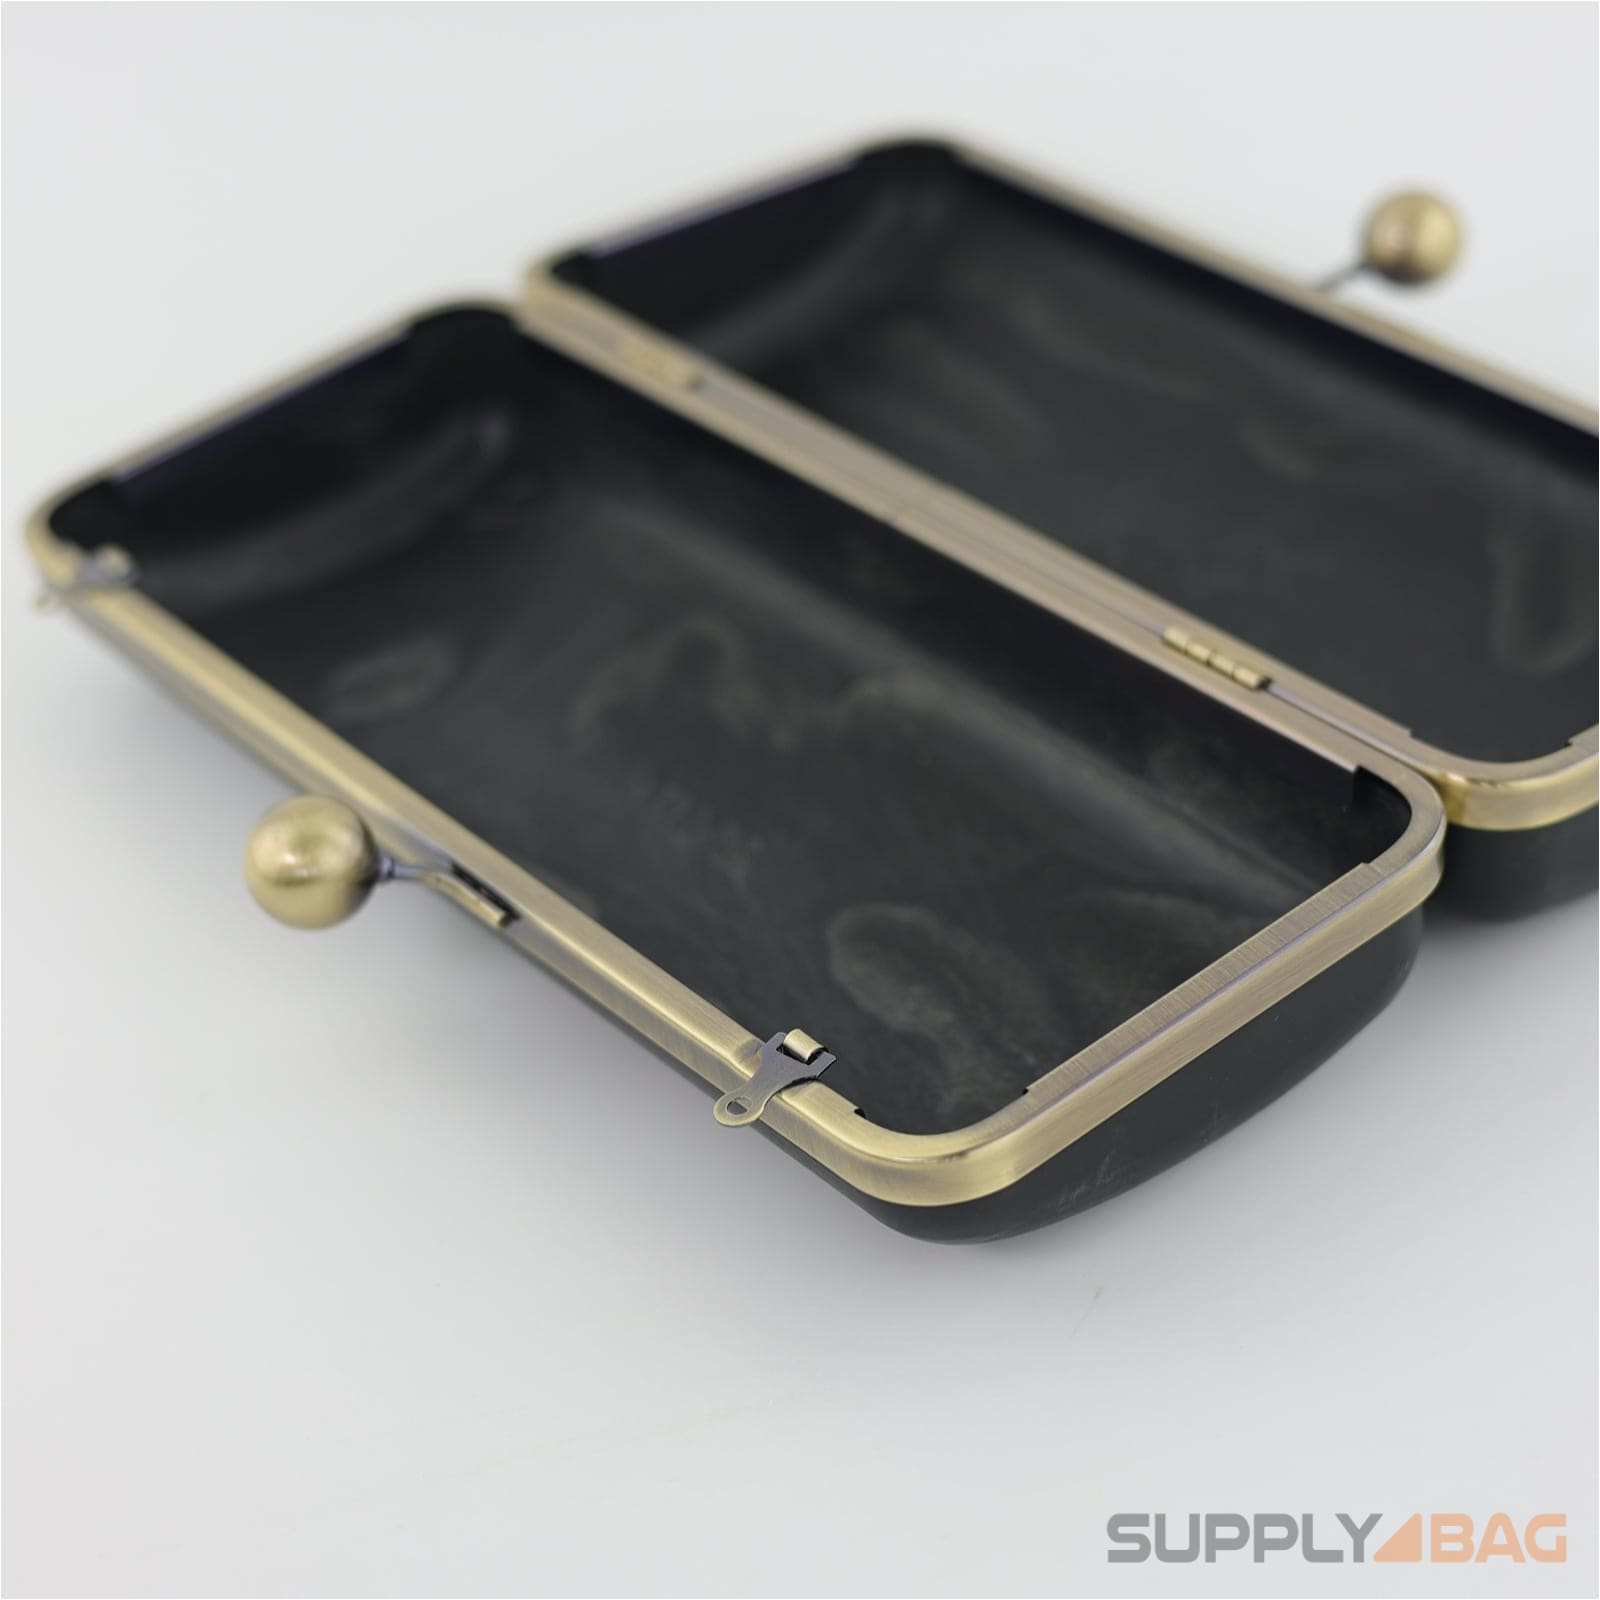 9.5 x 4 inch - Antique Brass Large Clamshell Clutch Frame